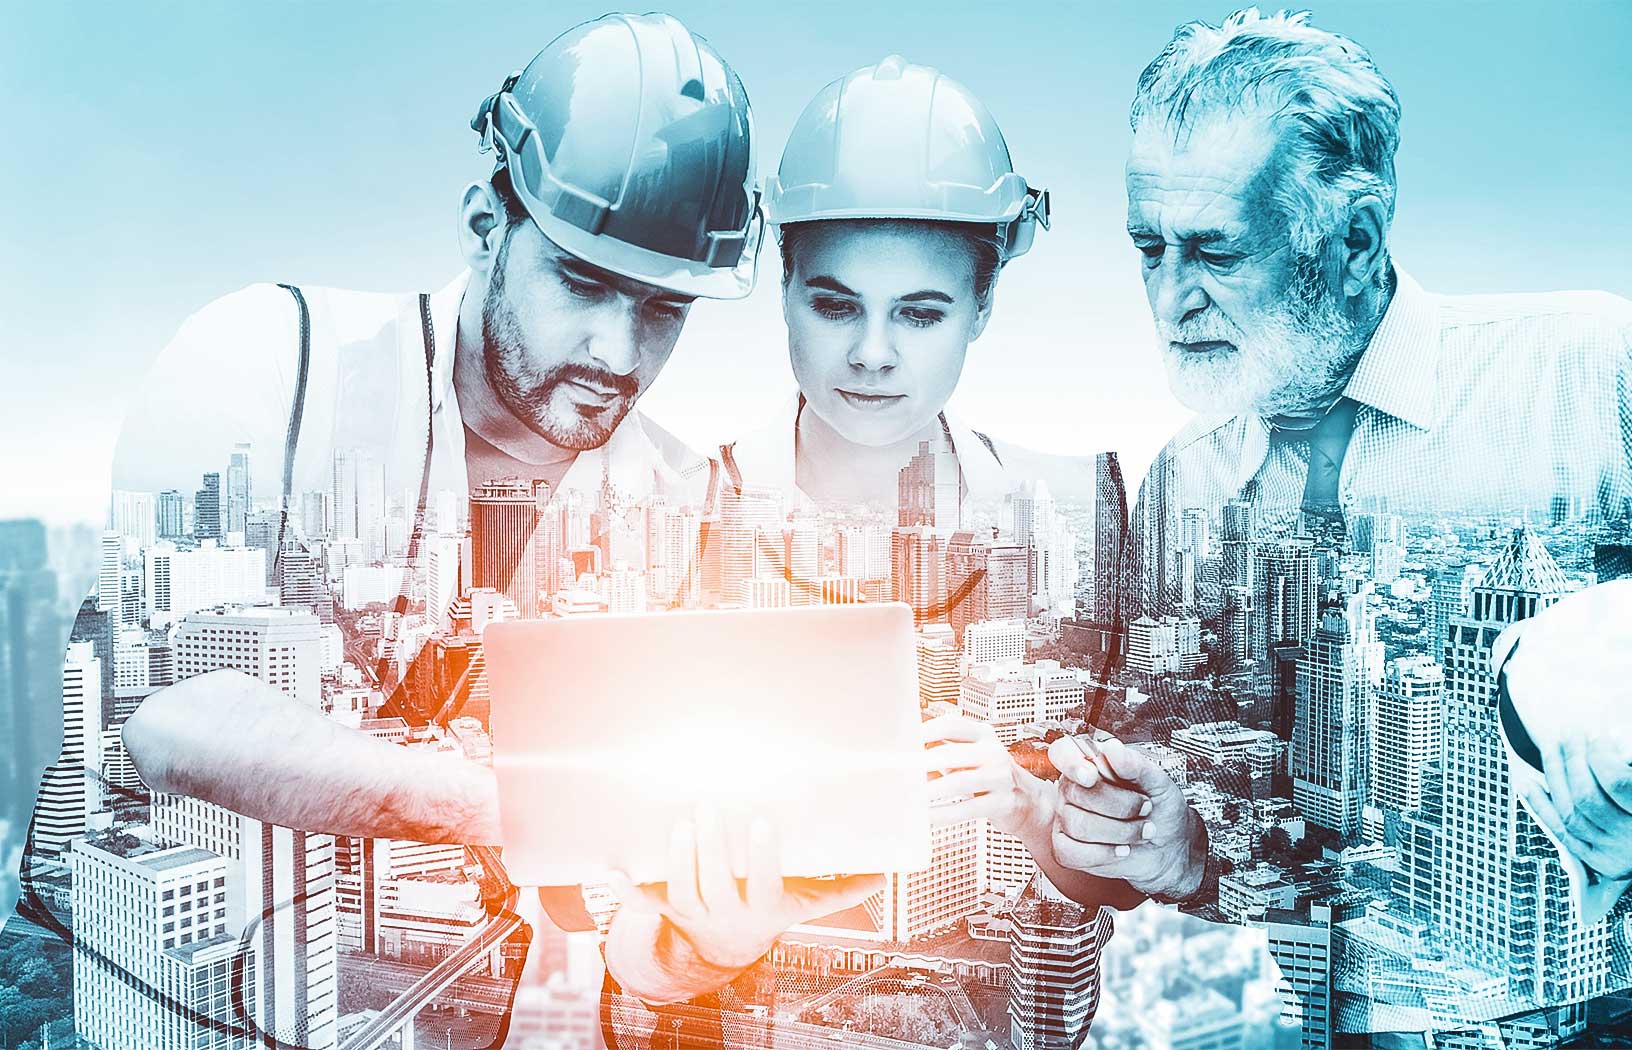 An image of three construction workers looking at a laptop superimposed over an image of a city landscape.